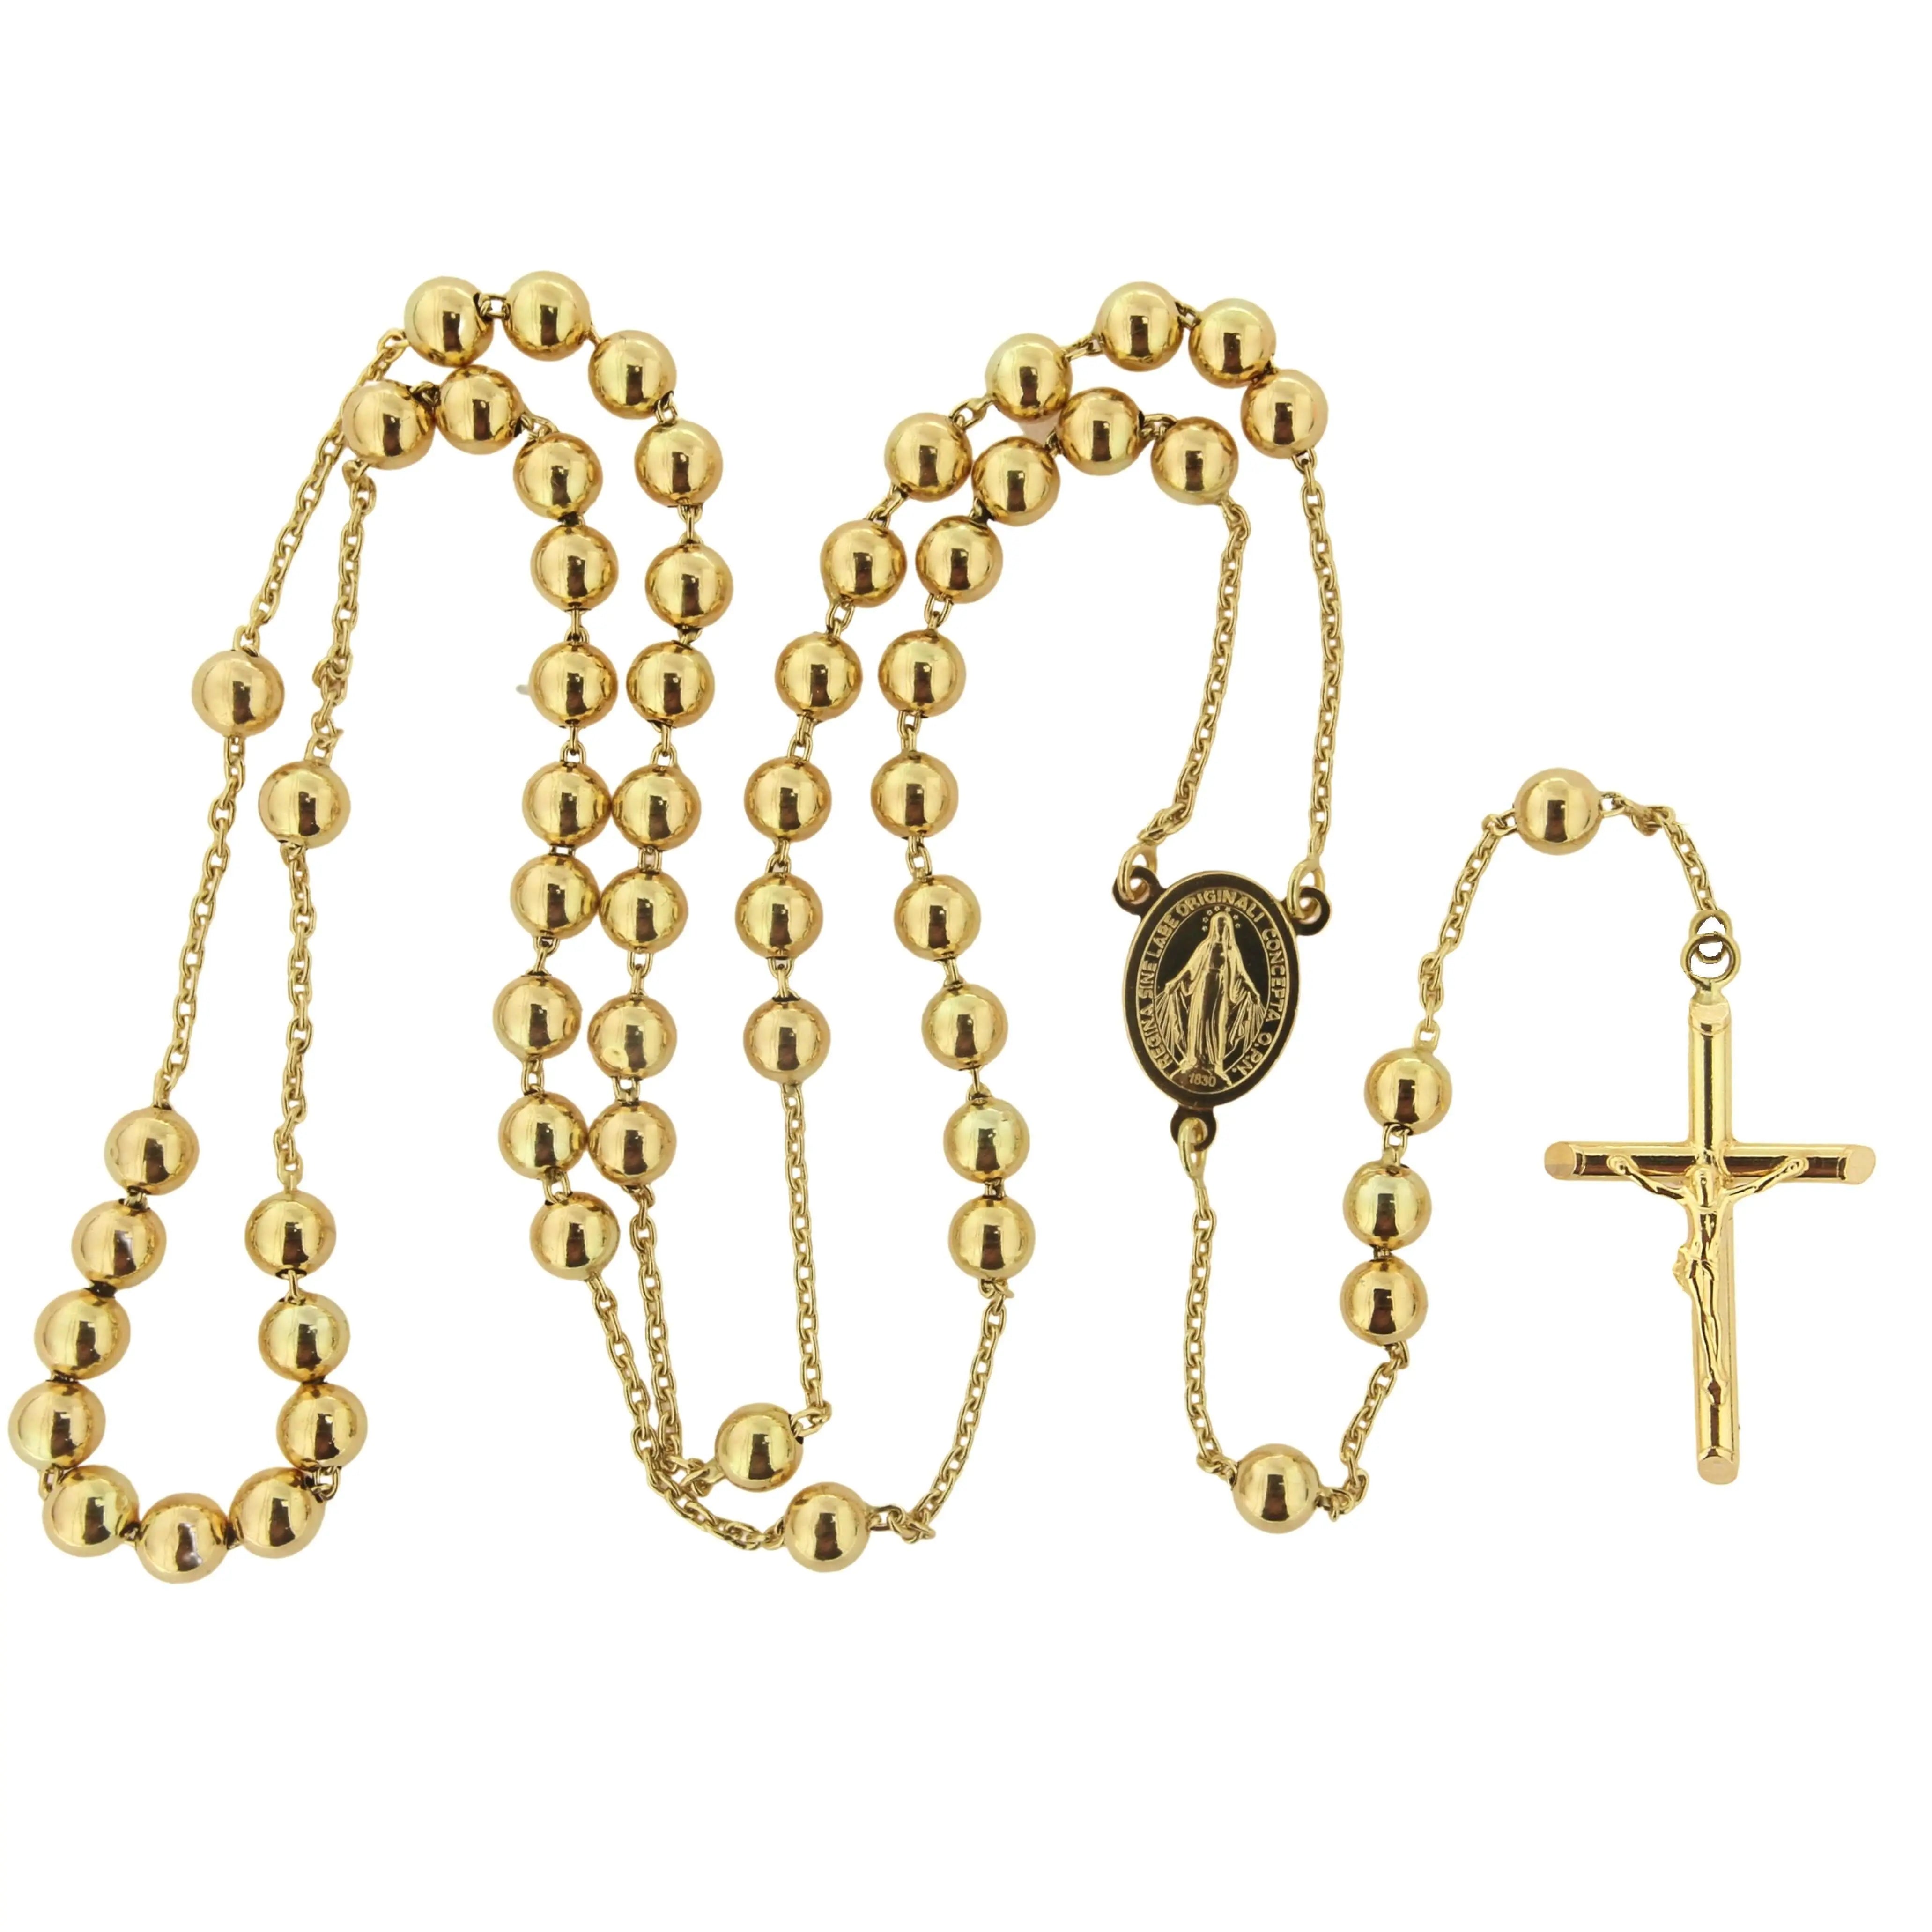 Mens Iced Rosary Necklace Cluster Cross Pendant 14k Gold Plated Cz Chain  Hip Hop | eBay